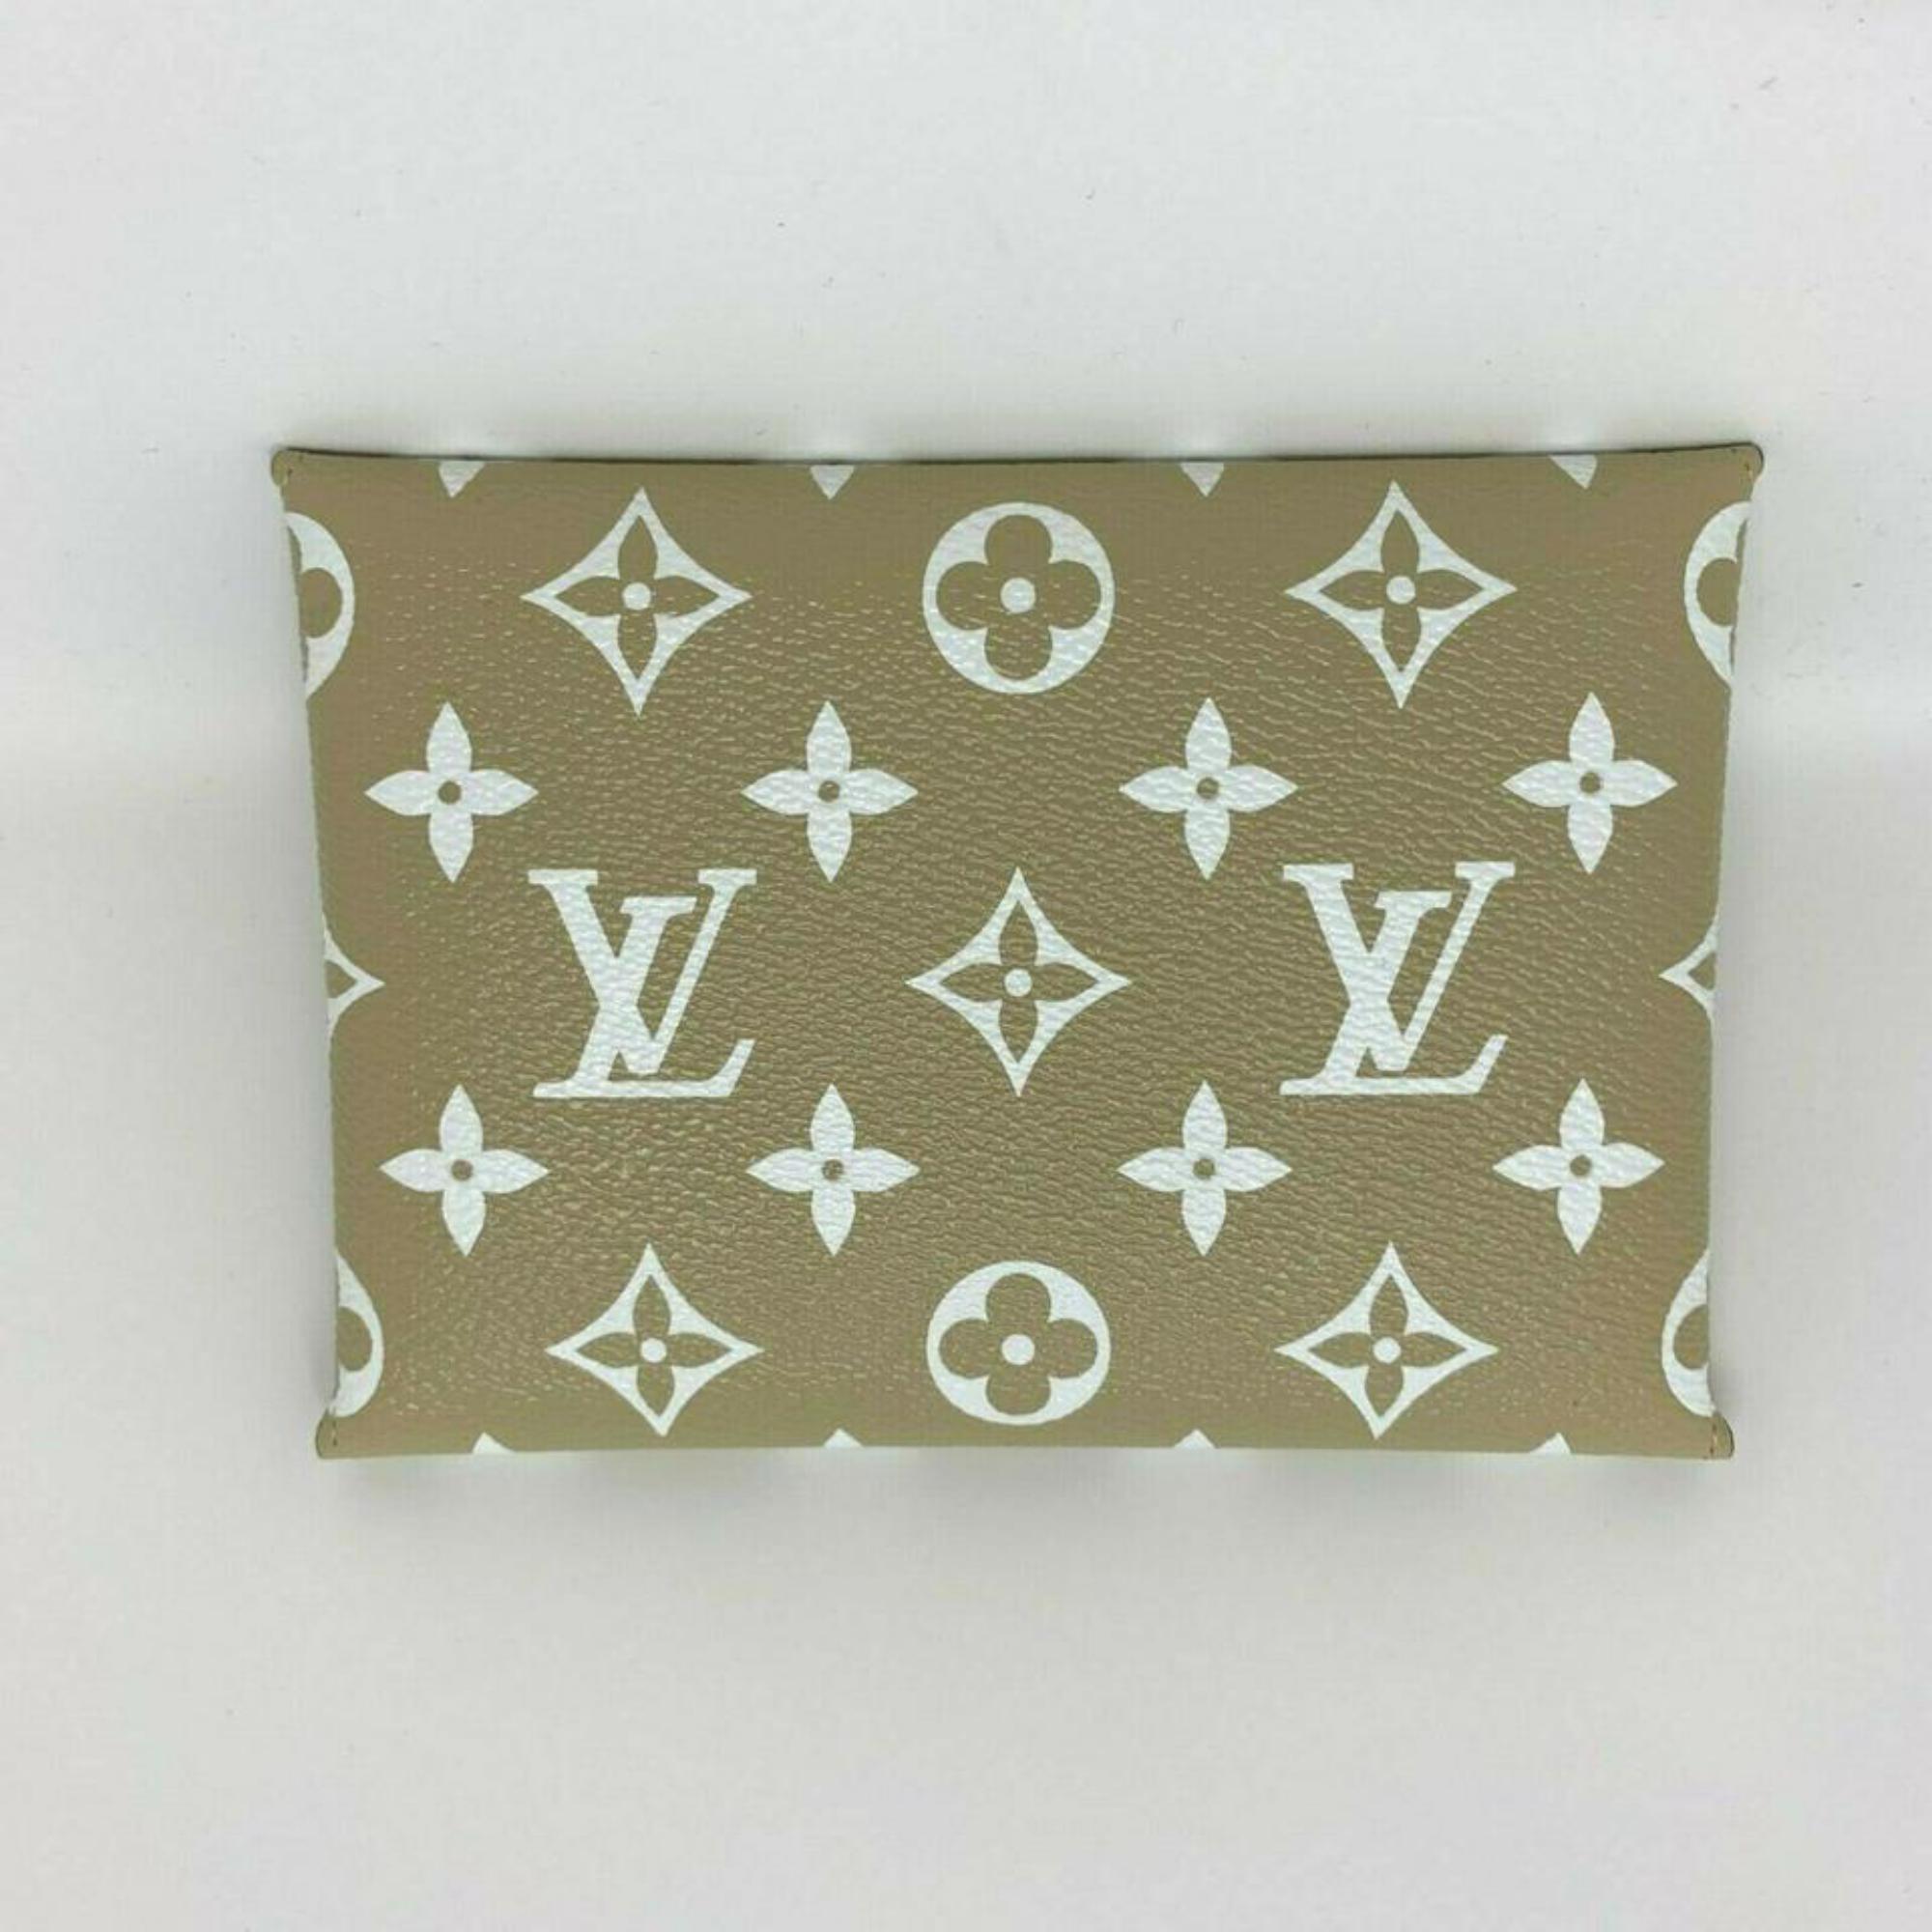 Women's Louis Vuitton Beige Medium Ss19 Limited Edition Giant Kirigami Pouch 870619  For Sale